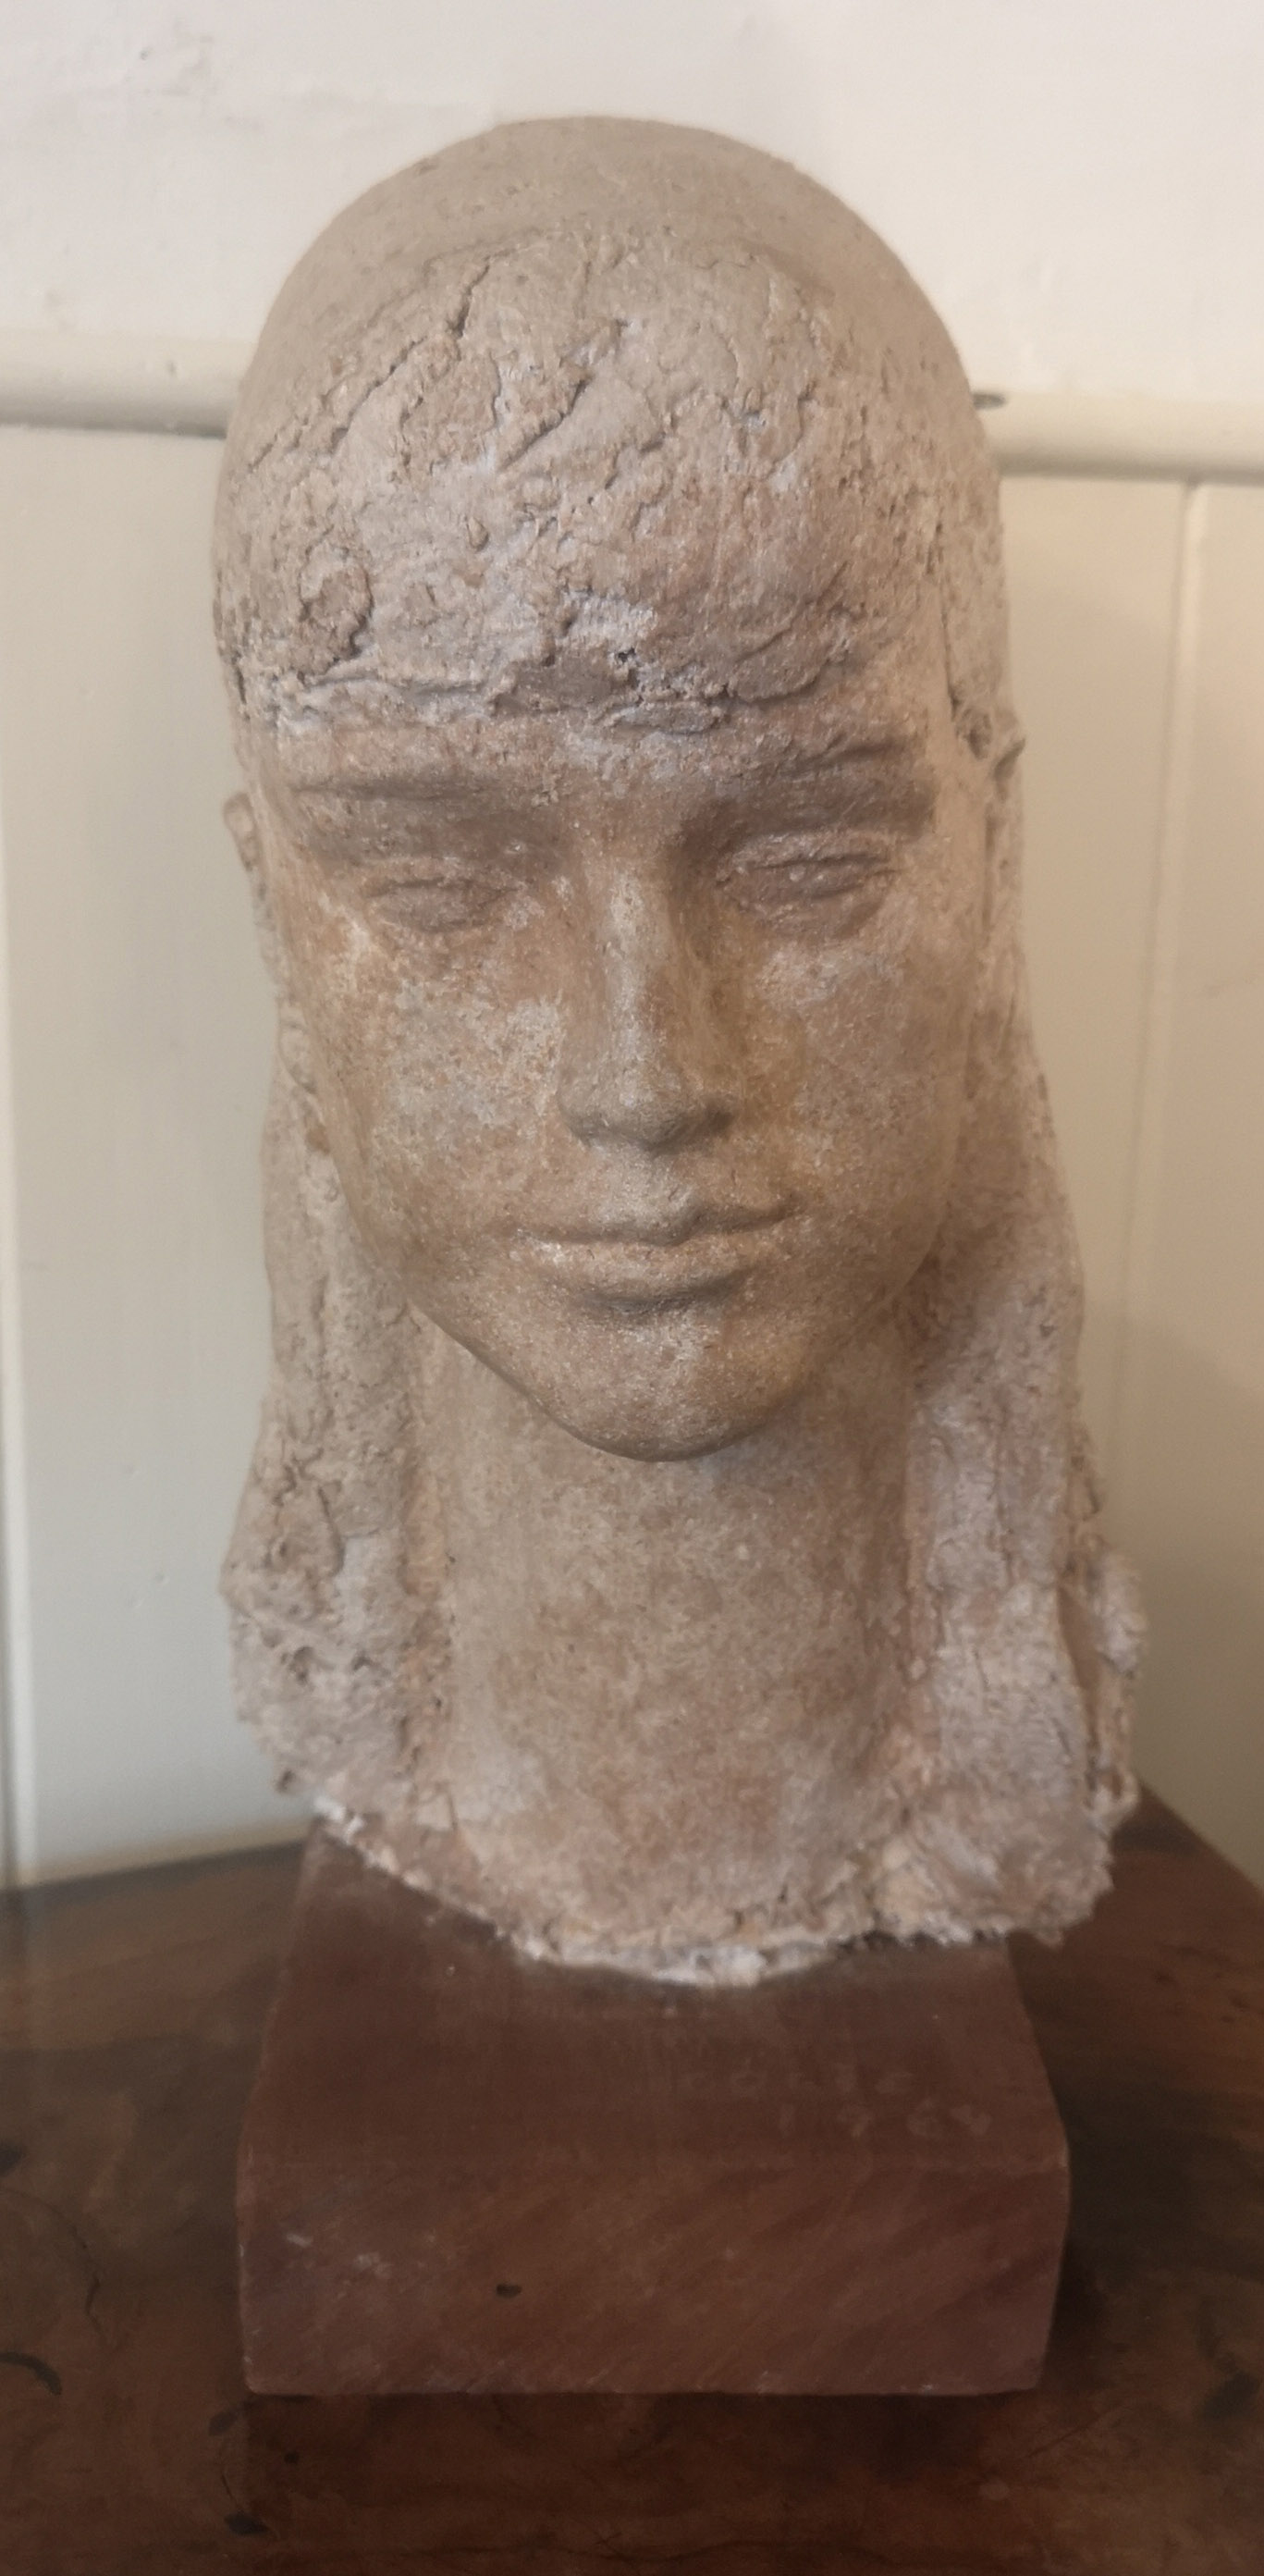 A MID 20TH CENTURY PLASTER MAQUETTE SCULPTURE Female bust, signed to base 'Corse 69', on wood